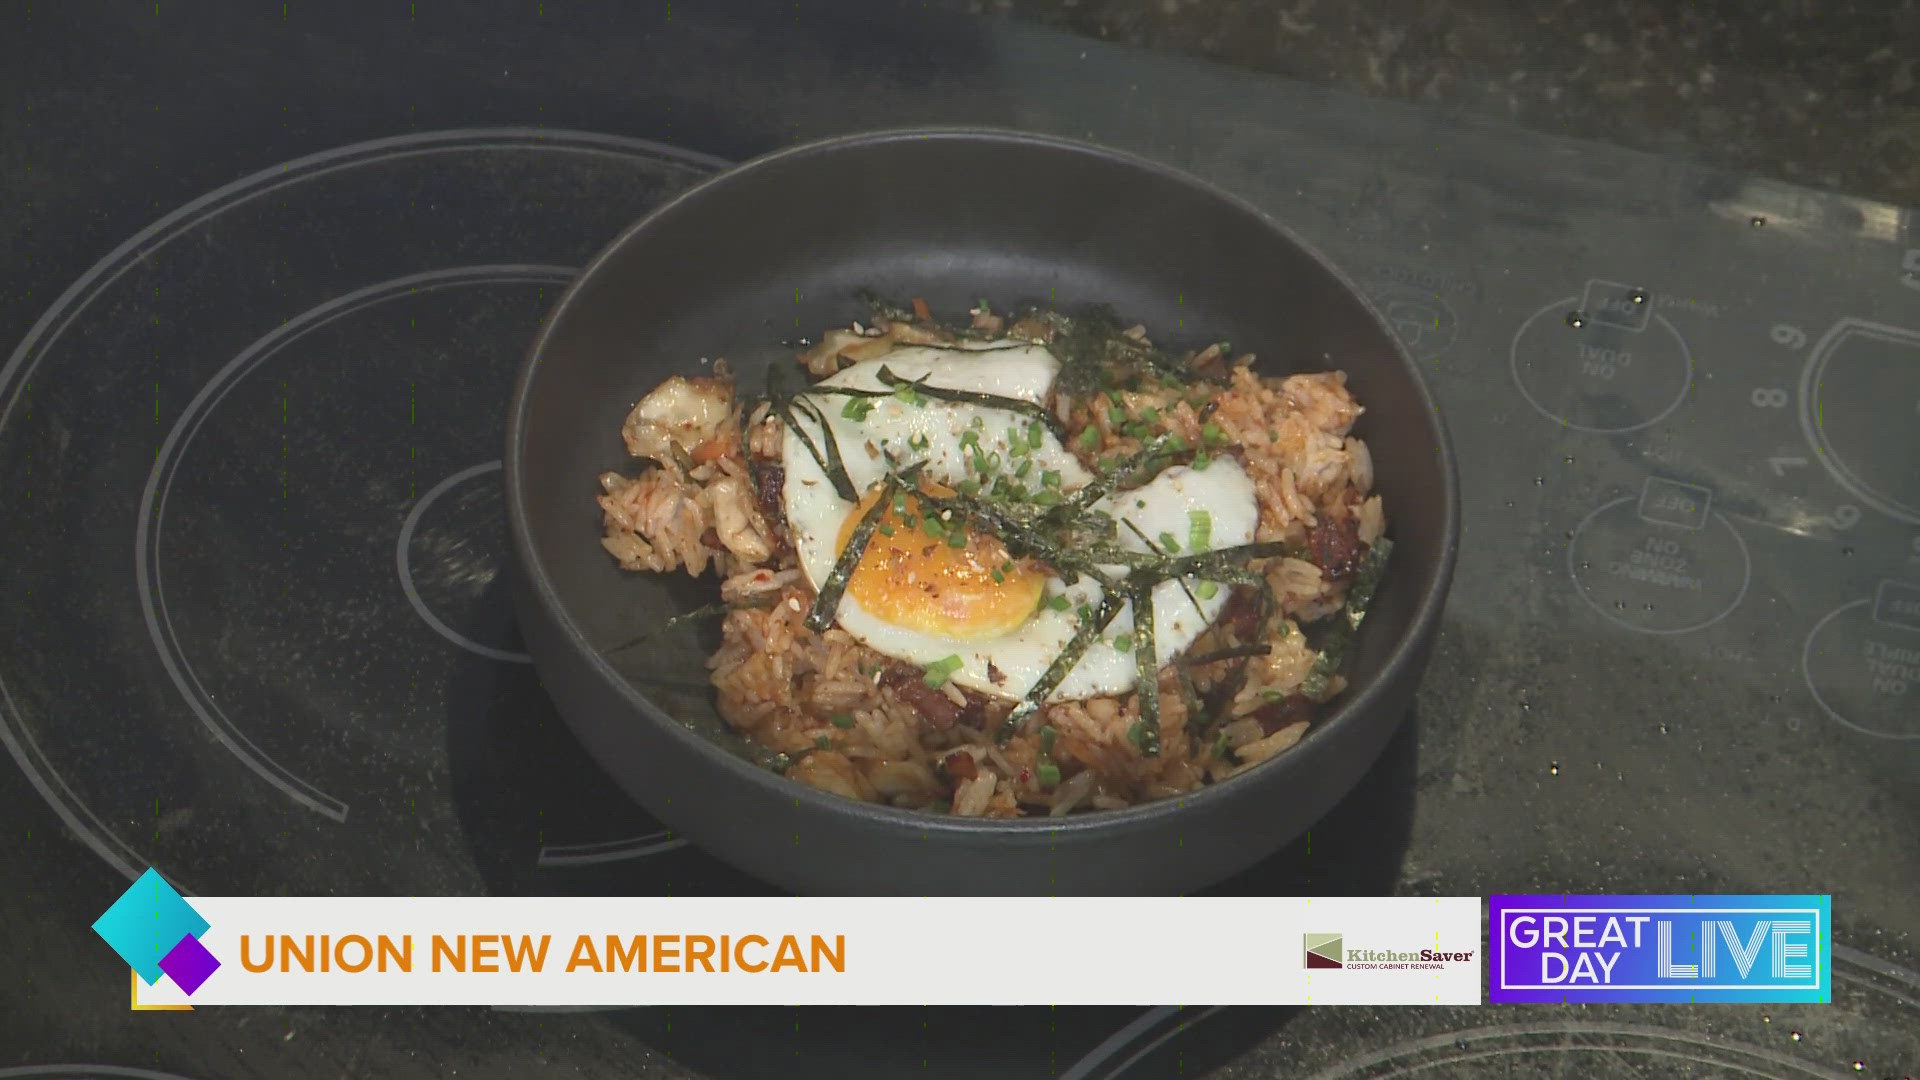 Union New American recently launched brunch! Executive Chef Jacob Rios joined us to talk about all the delicious menu items.